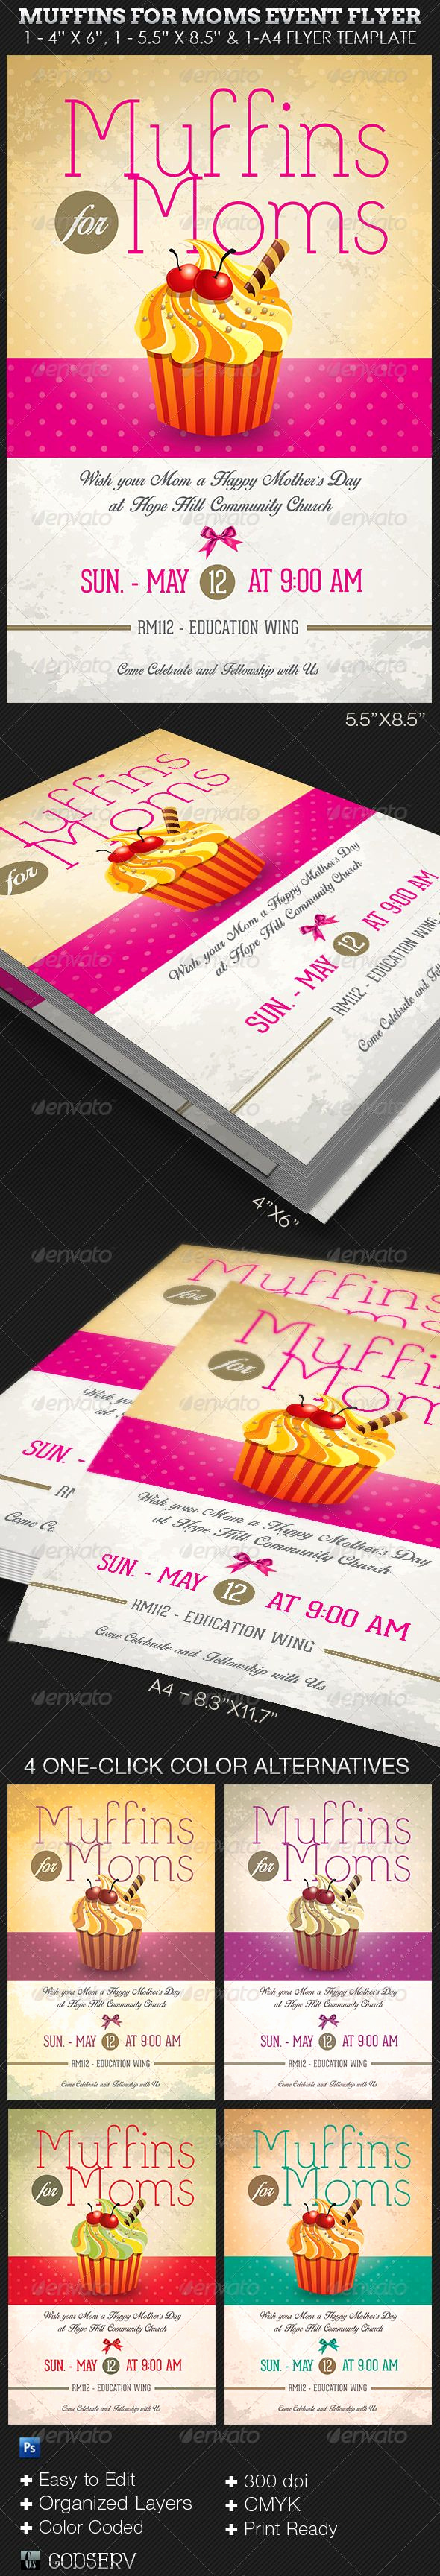 Muffins with Mom Invitation Template Elegant Best 25 event Flyers Ideas On Pinterest